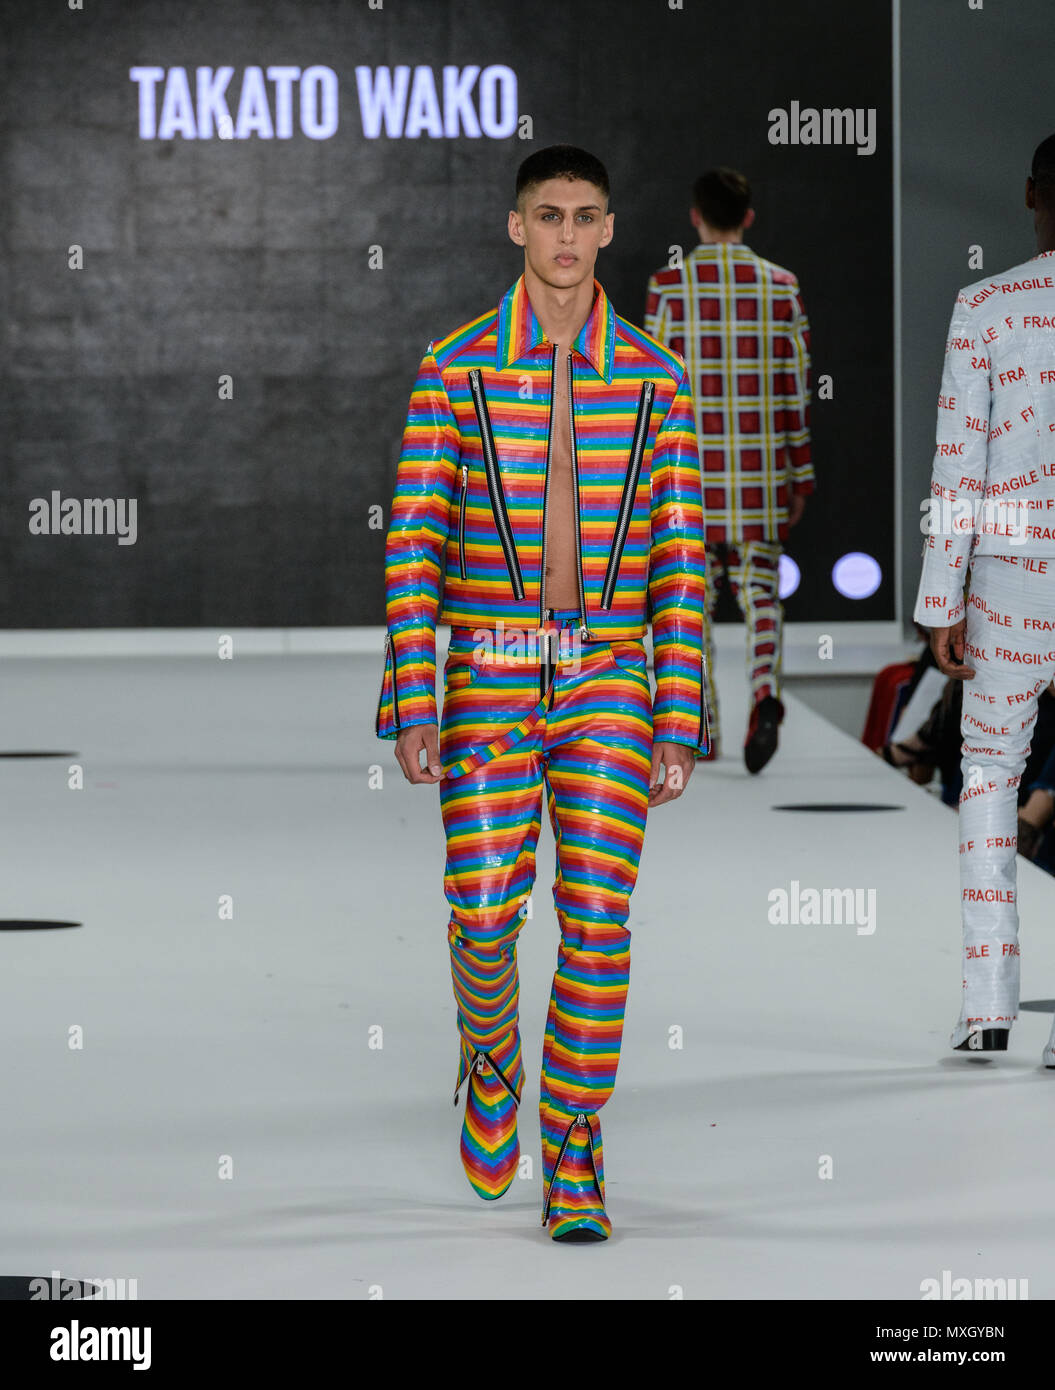 Takato Wako's brilliant Vynl Mens Collection at Nottingham Trents show at Graduate Fashion Week in London 2018 Credit: Marc Wainwright Photography/Alamy Live News Stock Photo